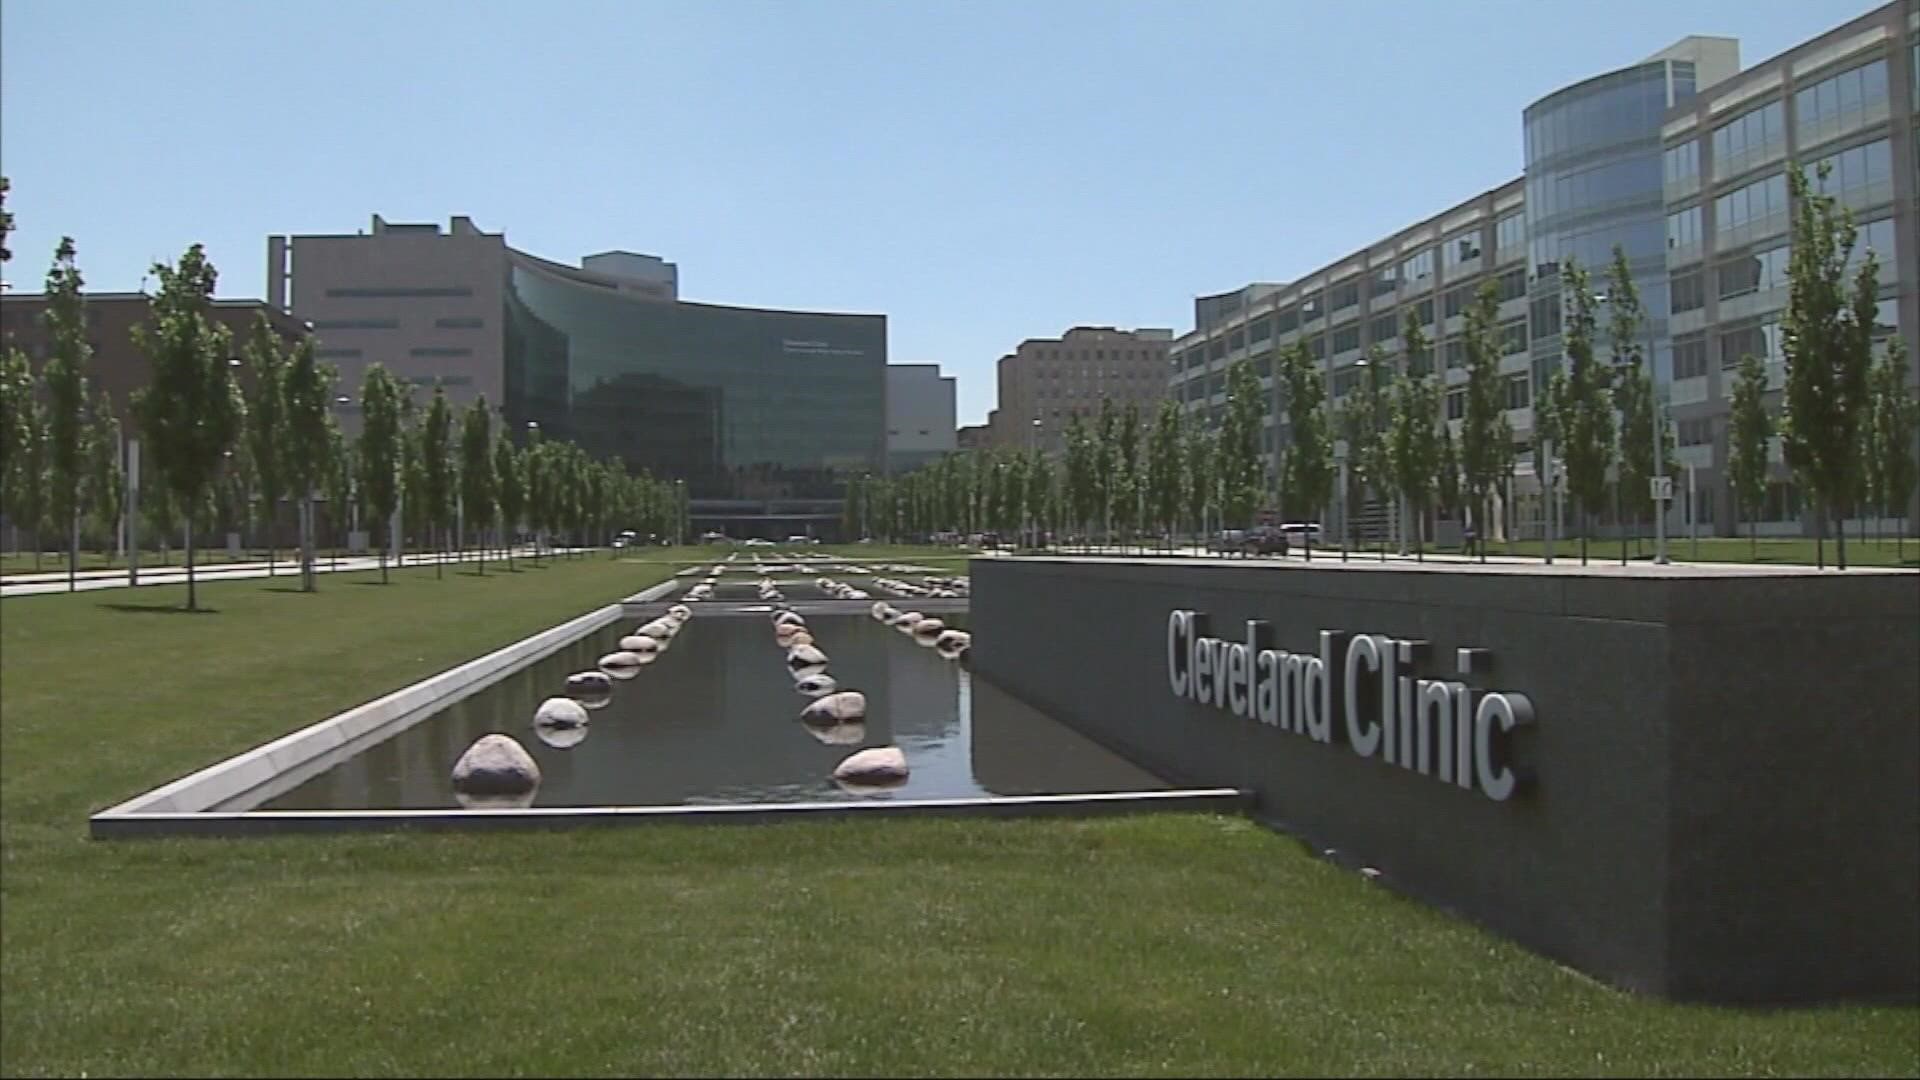 Cleveland Clinic received threats made against two of its facilities on Wednesday evening.